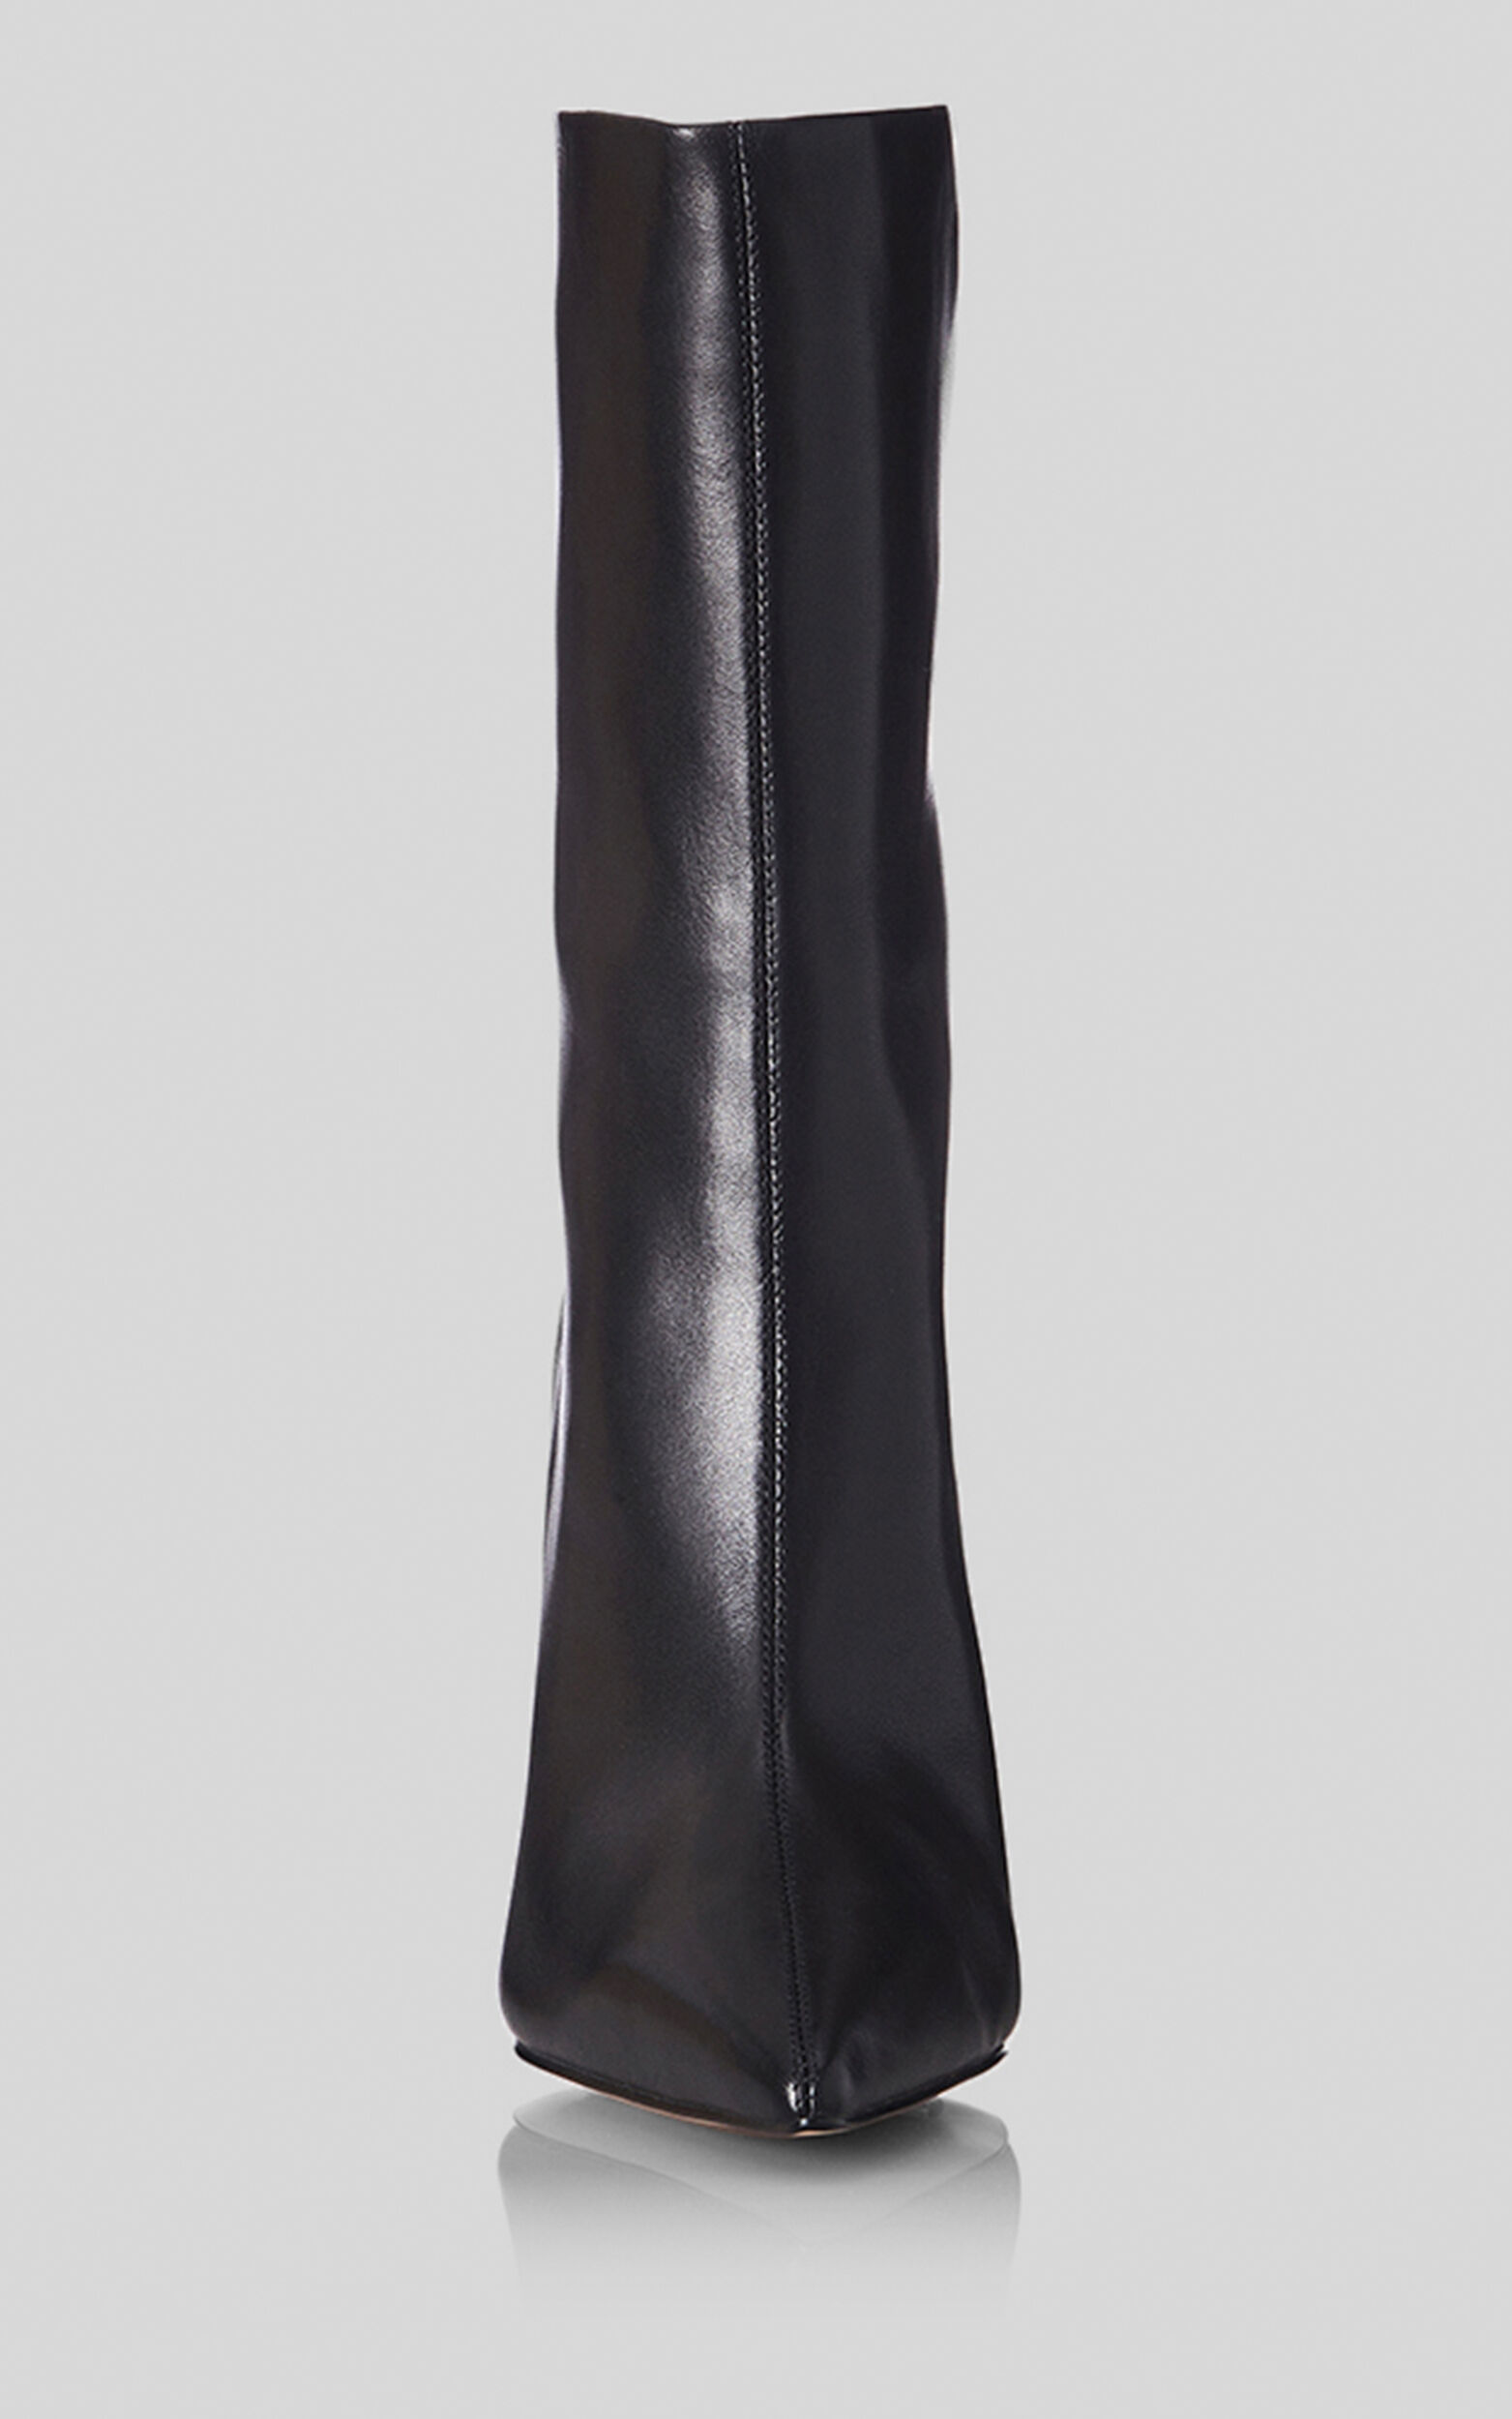 Alias Mae - Bosley Boots in Black Leather - 05, BLK1, super-hi-res image number null